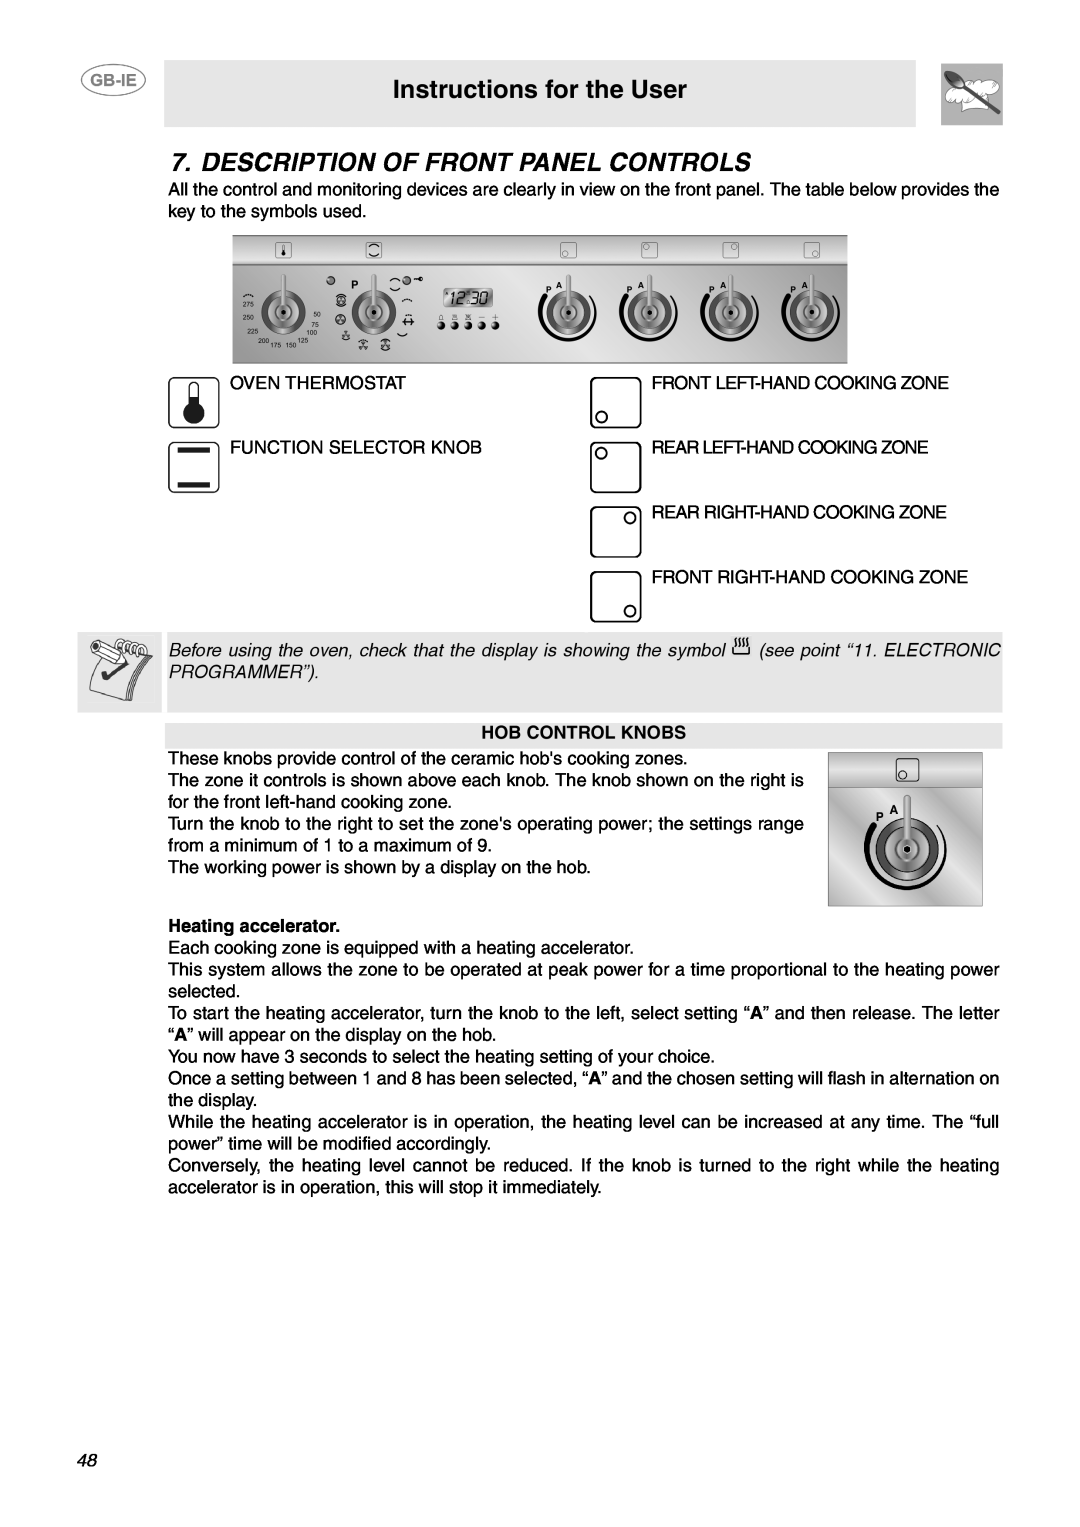 Smeg SCB64MPX5 Description Of Front Panel Controls, Instructions for the User, Hob Control Knobs, Heating accelerator 